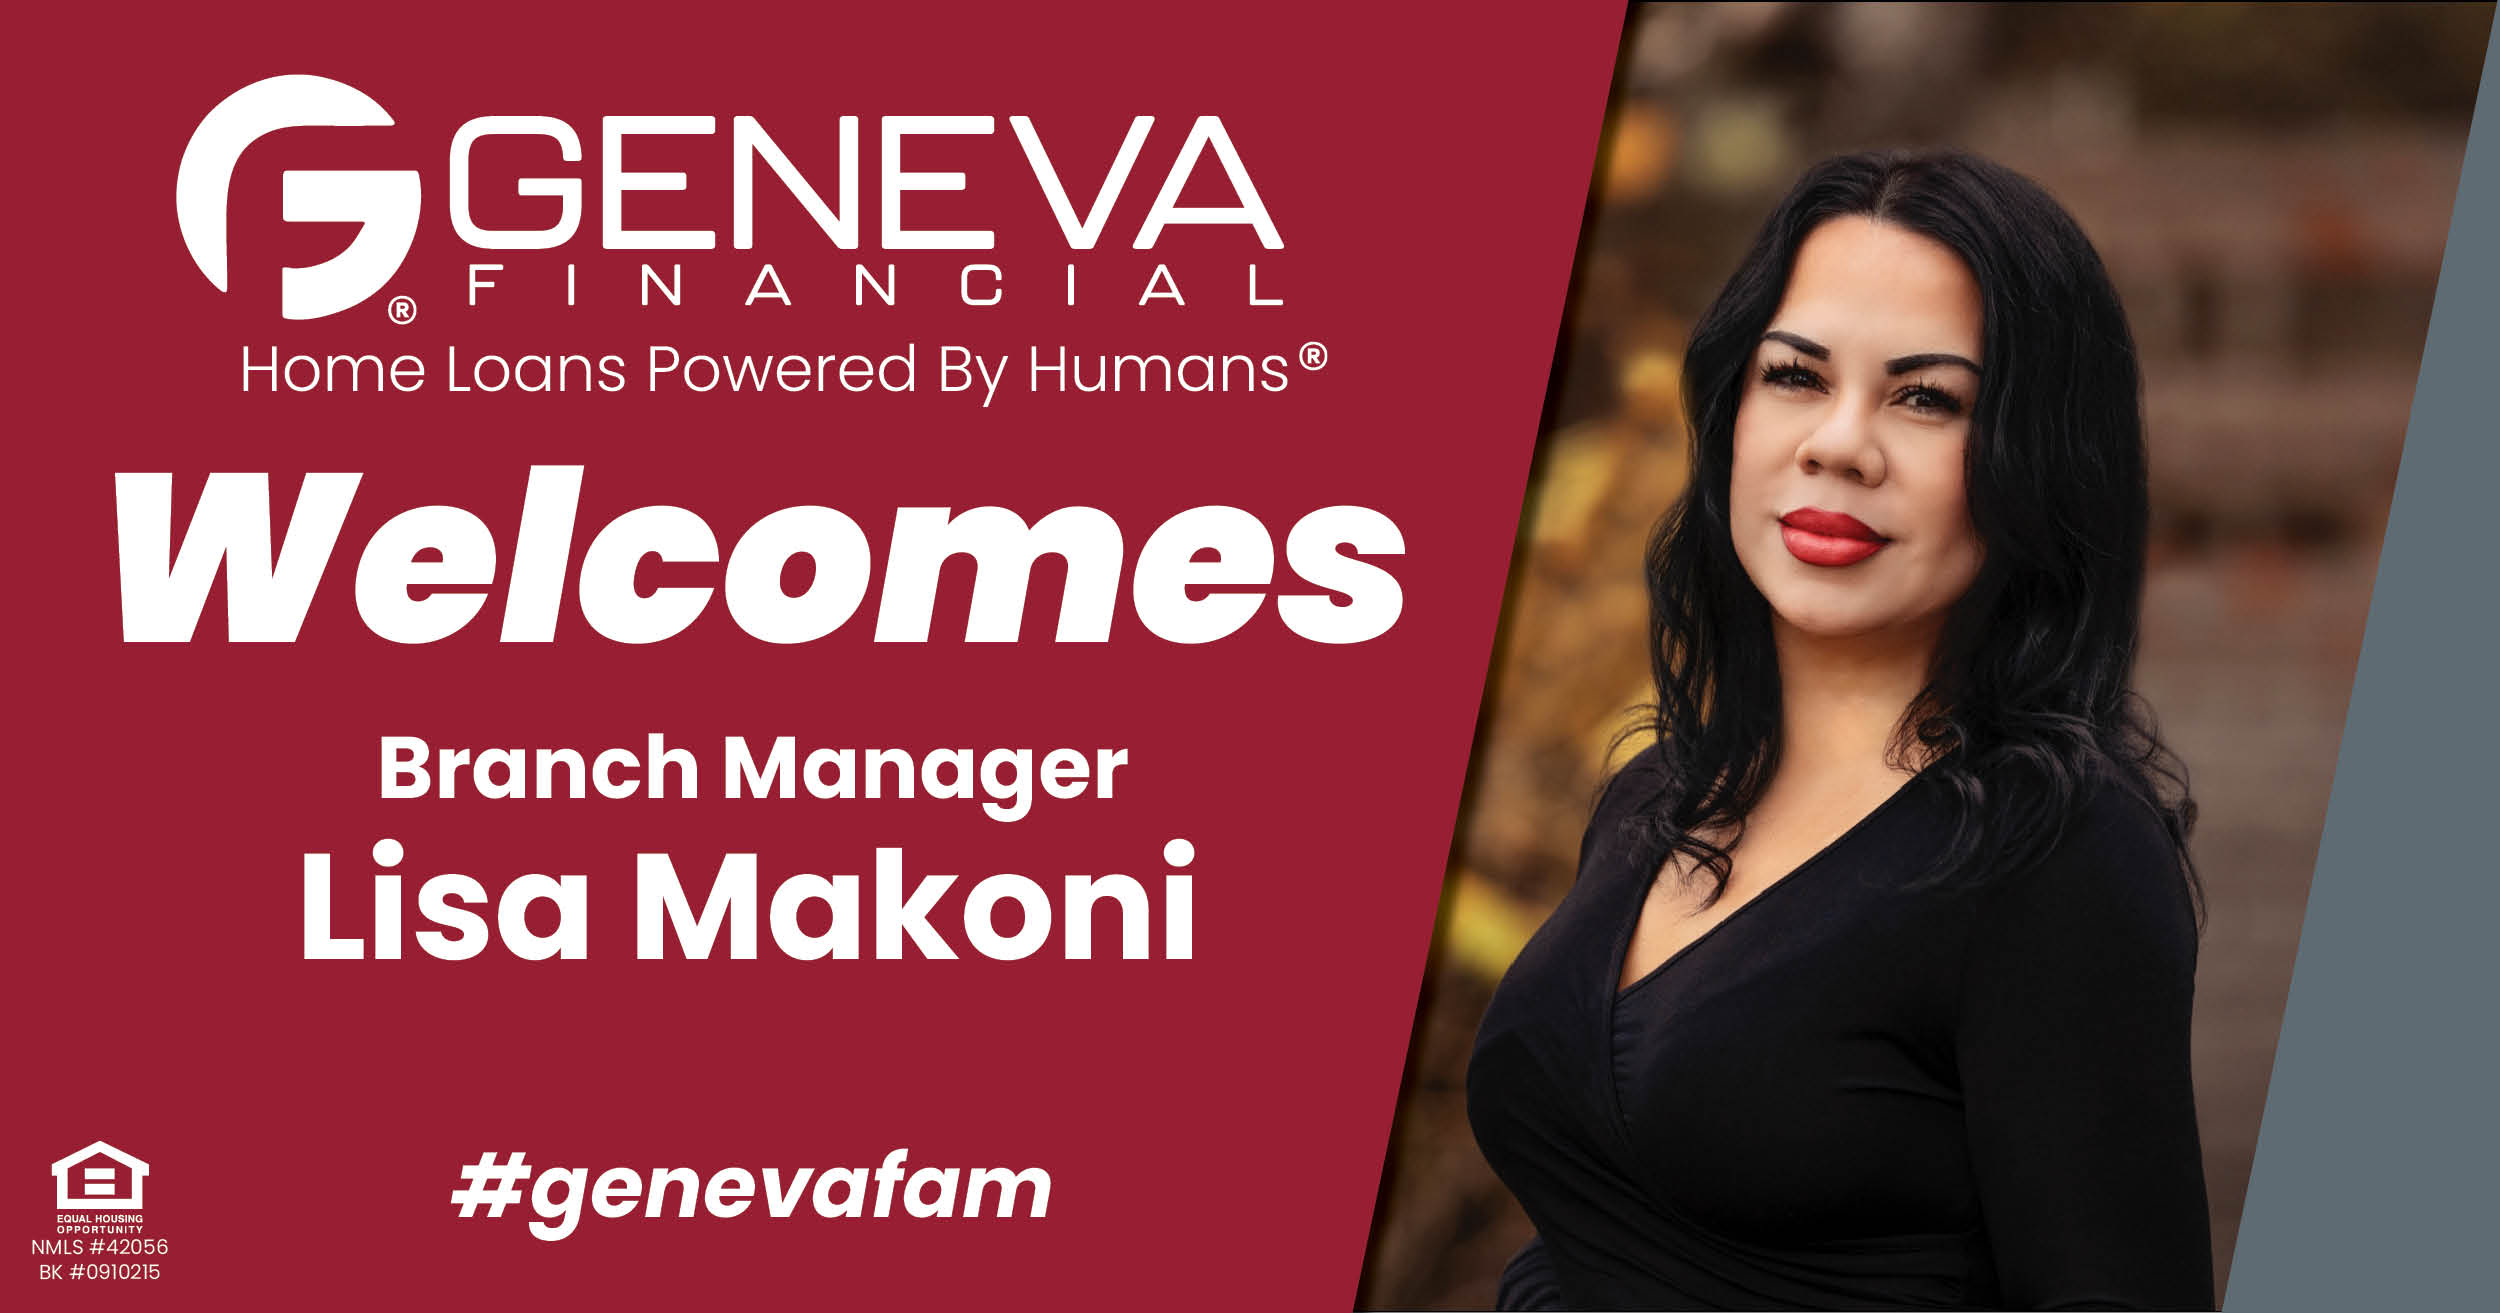 Geneva Financial Welcomes New Branch Manager Lisa Makoni to Anchorage, Alaska – Home Loans Powered by Humans®.